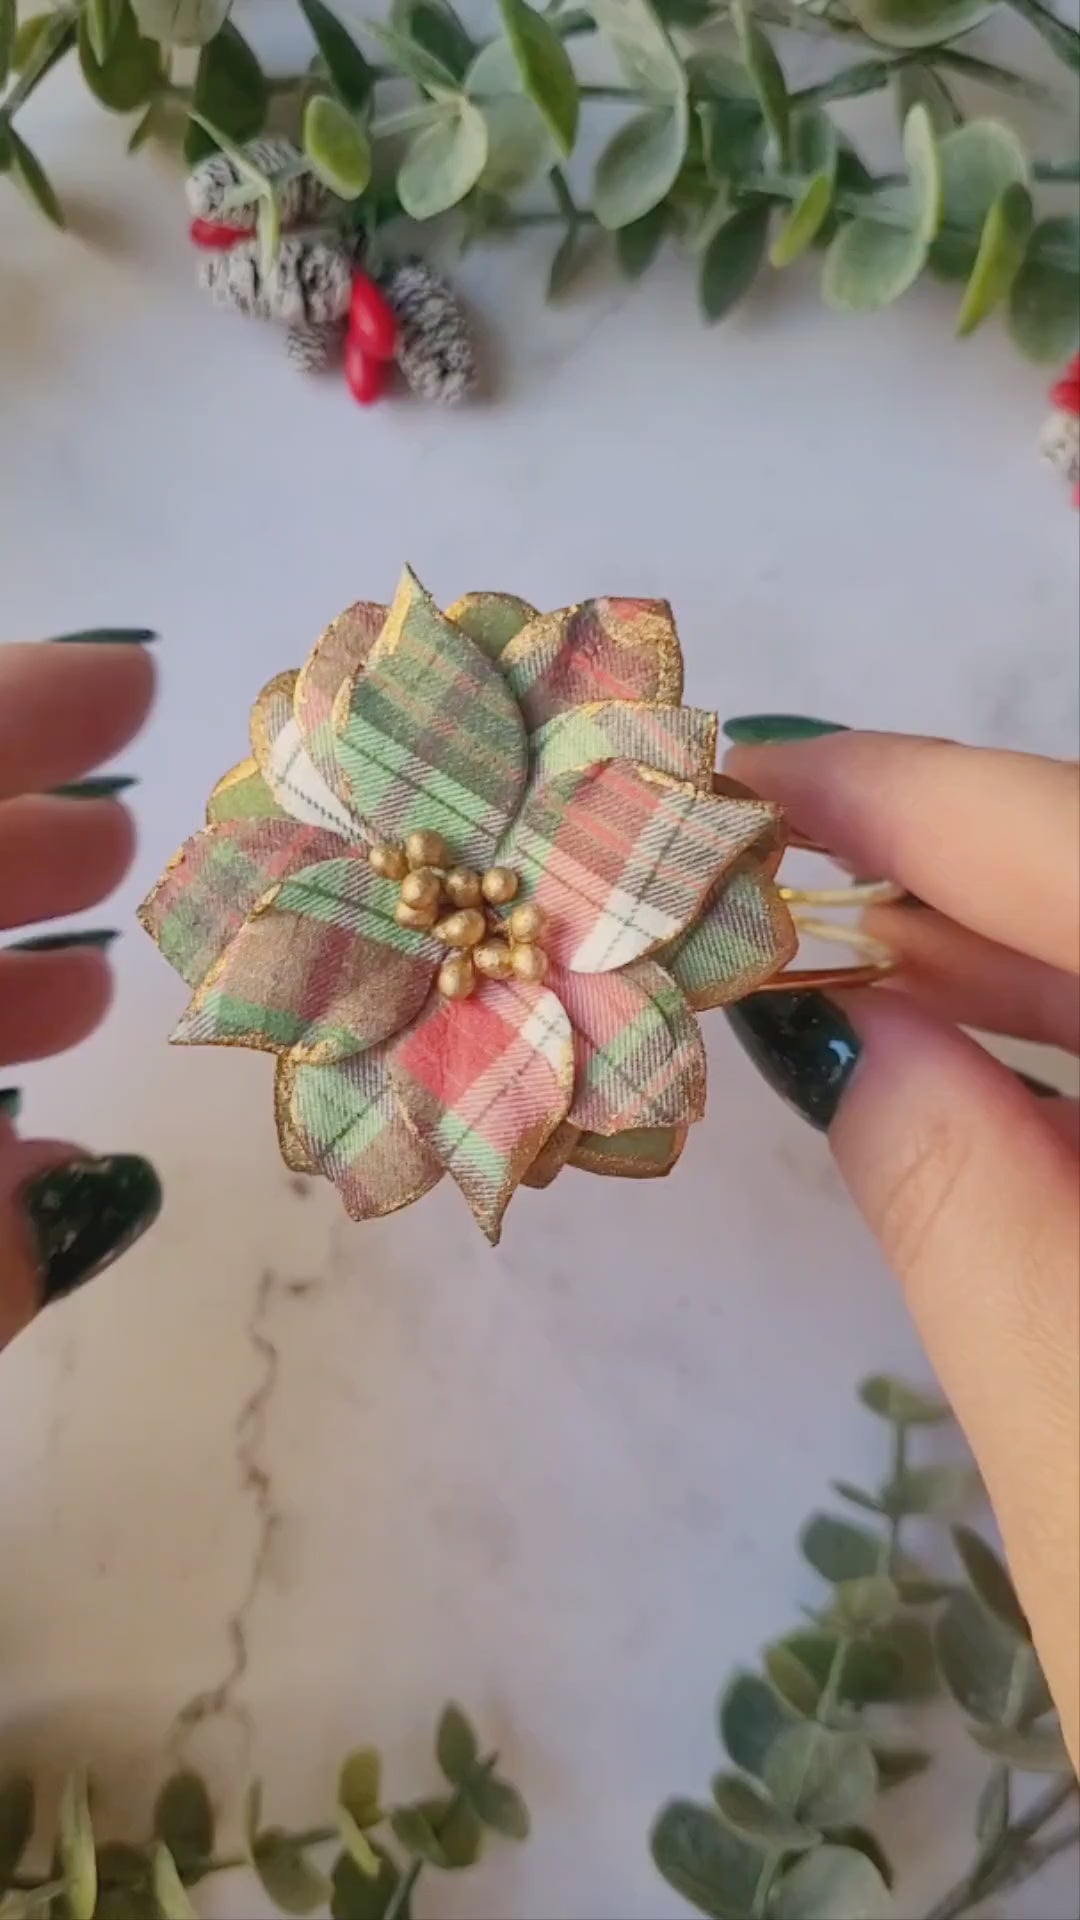 video close up of the Christmas themed plaid poinsettia bracelet on a marble background surrounded by foliage.